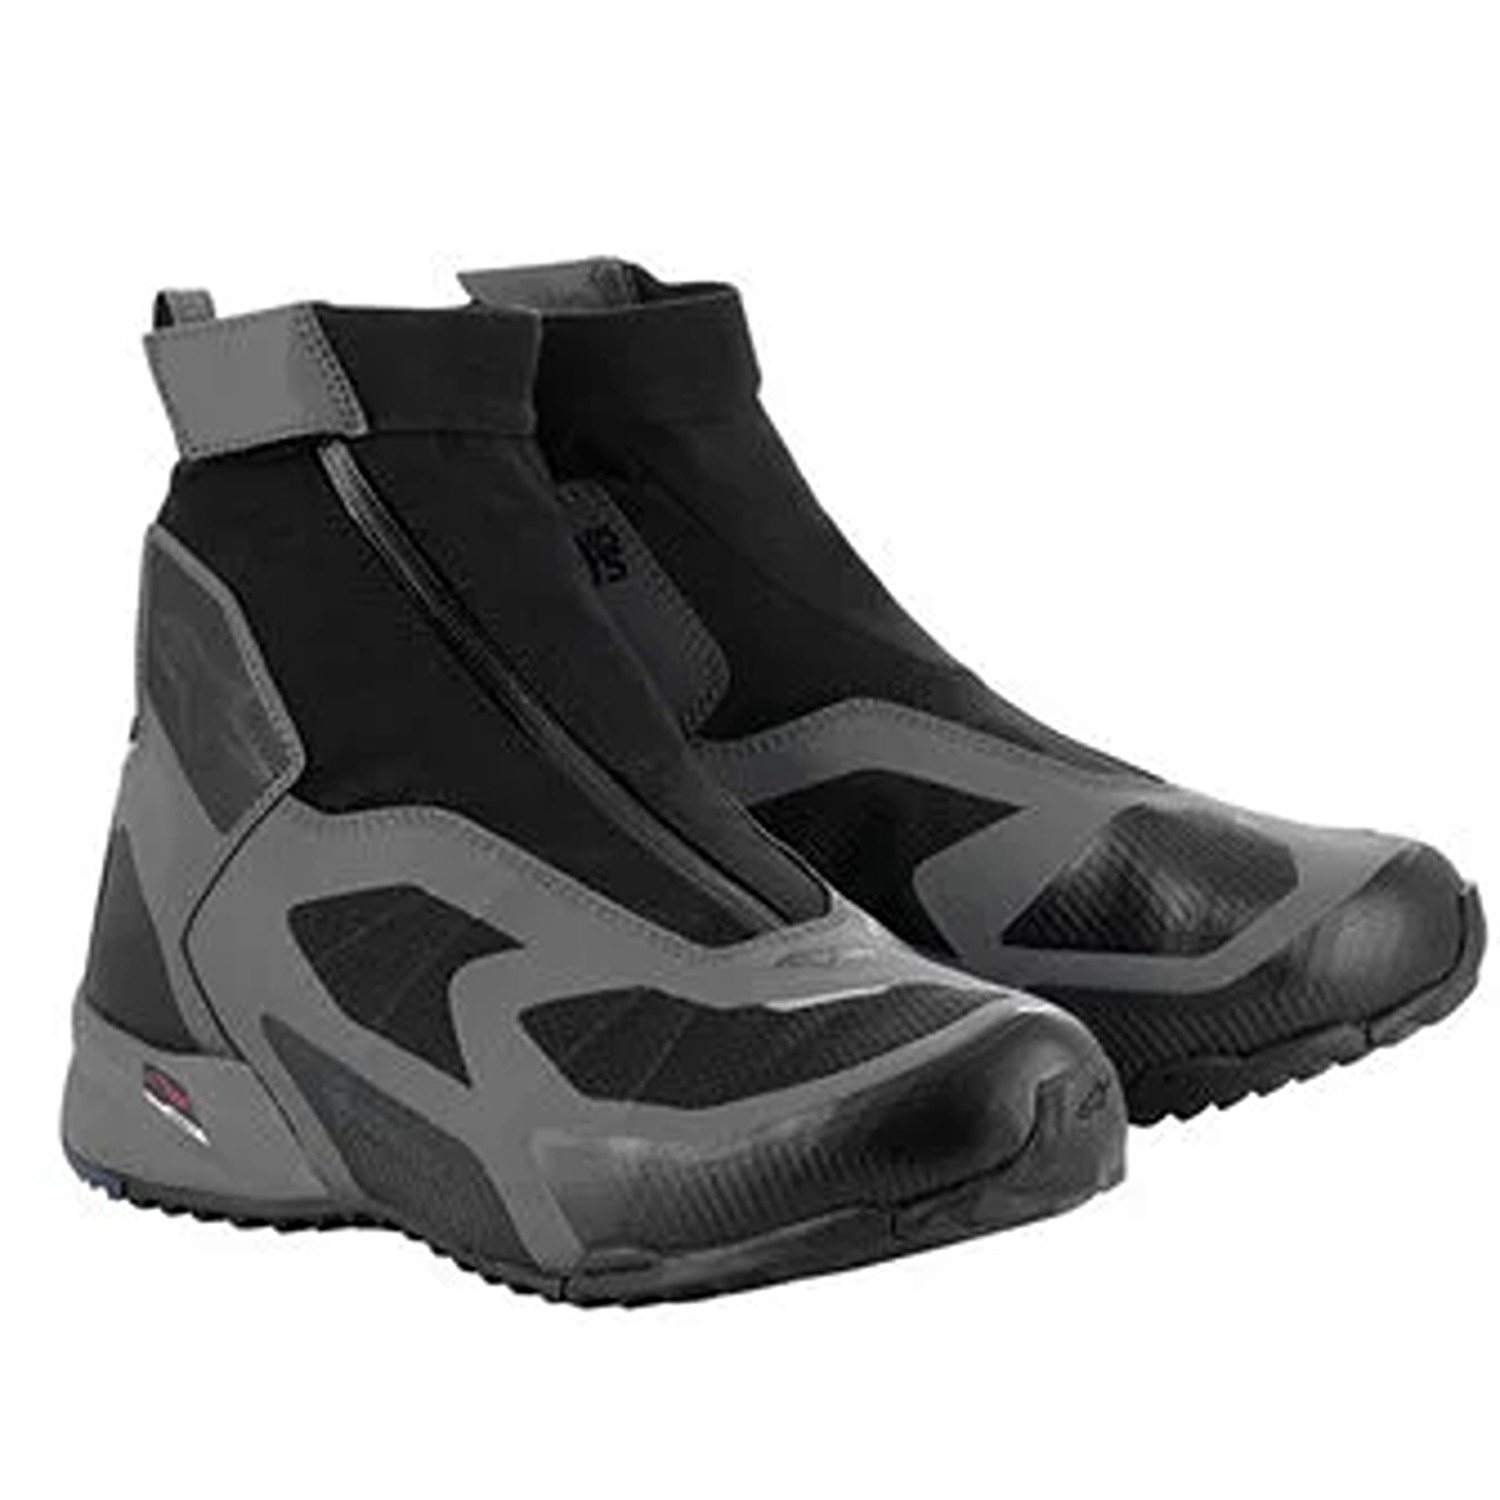 Image of EU Alpinestars CR-8 Gore-Tex Shoes Black Mid Gray Bright Red Taille US 115